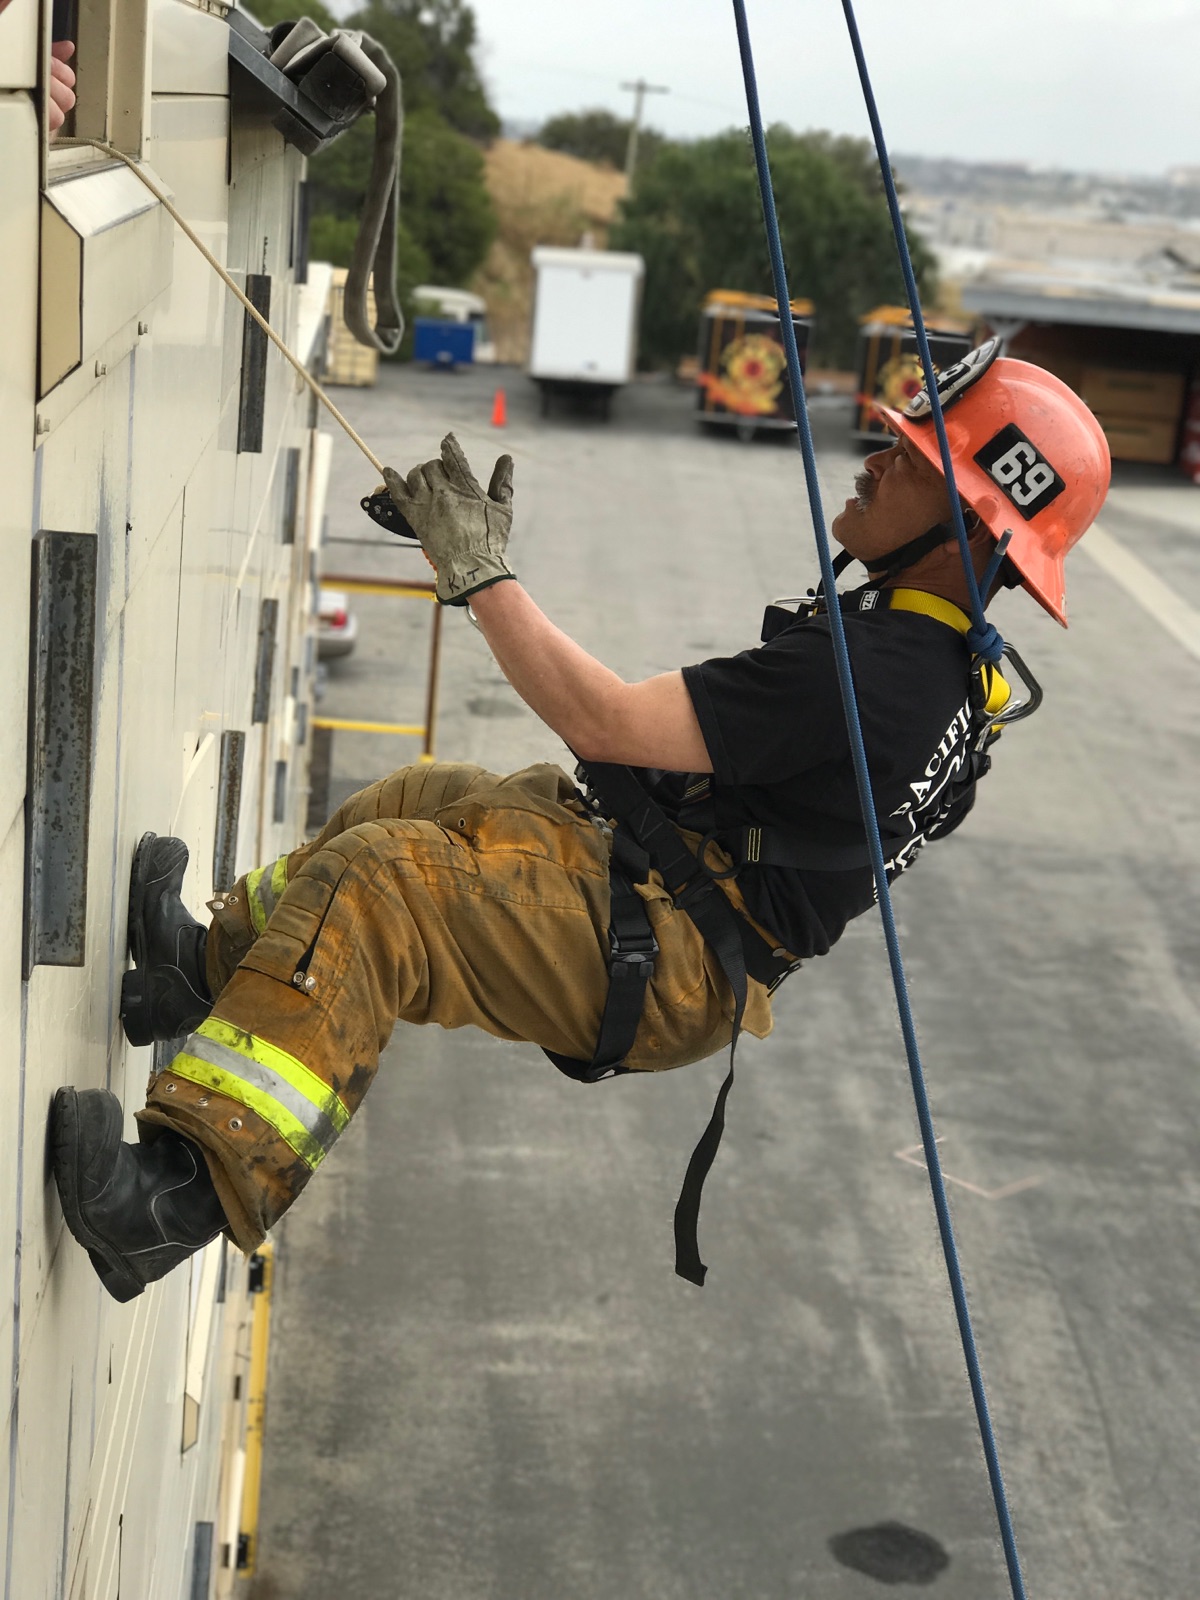 Subject rappelling on side of building